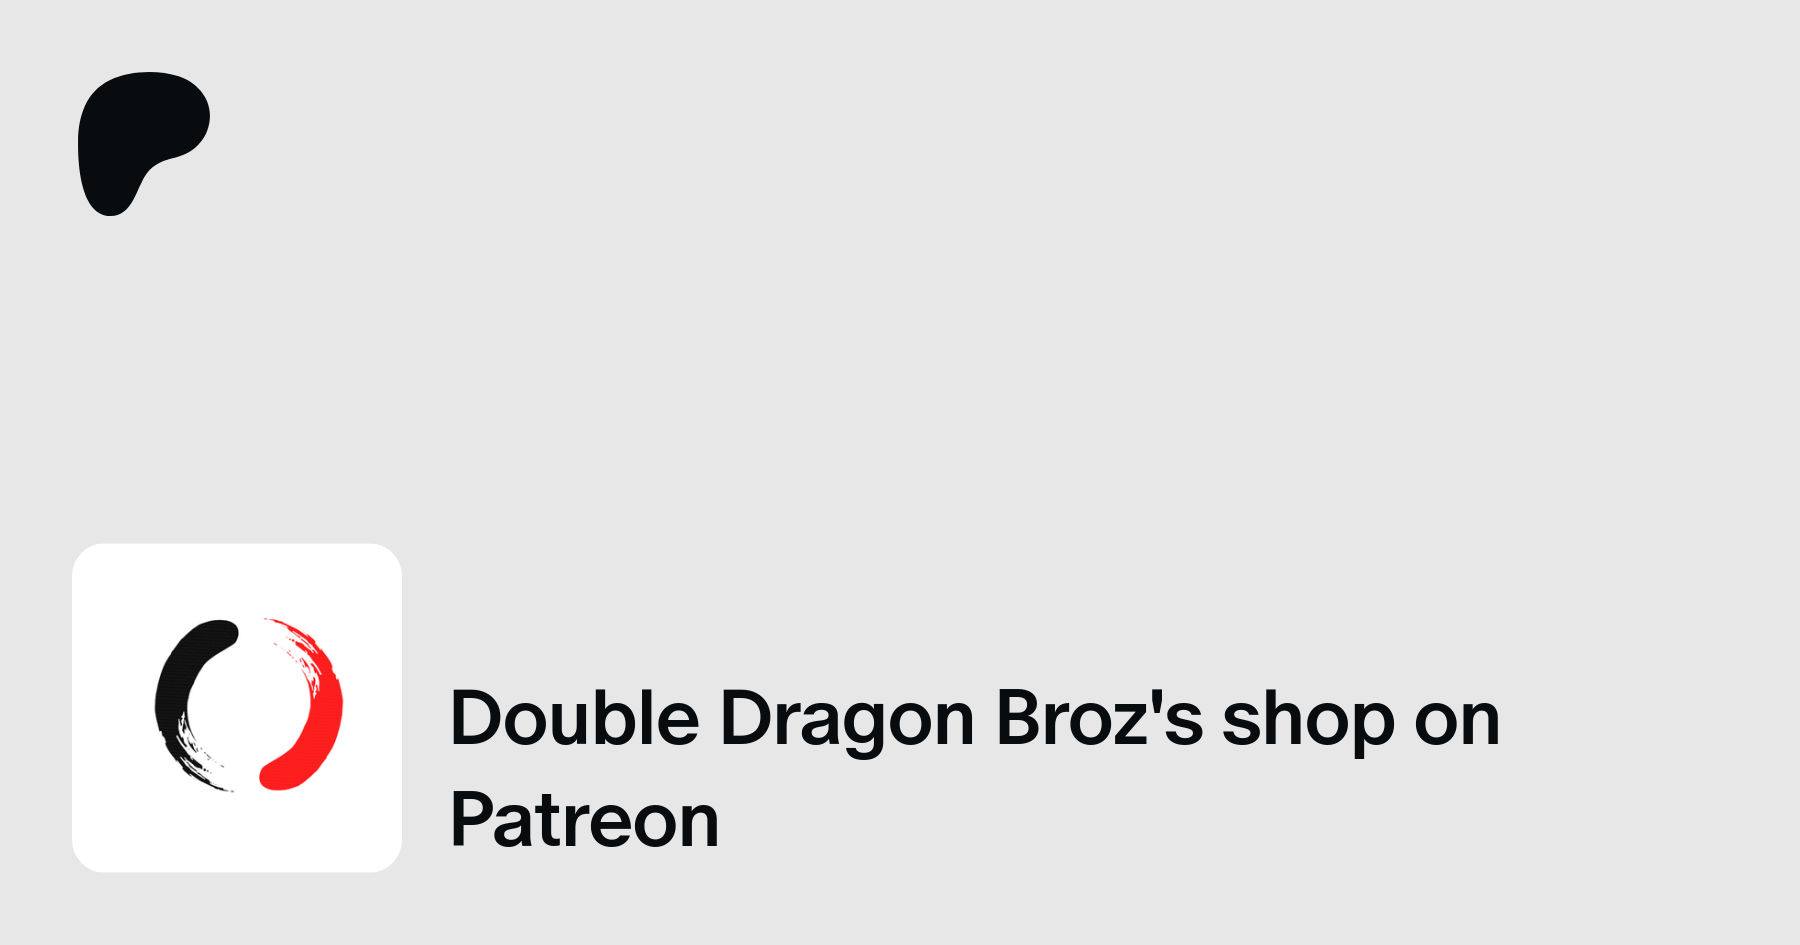 Tokyo Revengers: Season 1 - Episode 04 [RAW] by DoubleDragonBroz from  Patreon